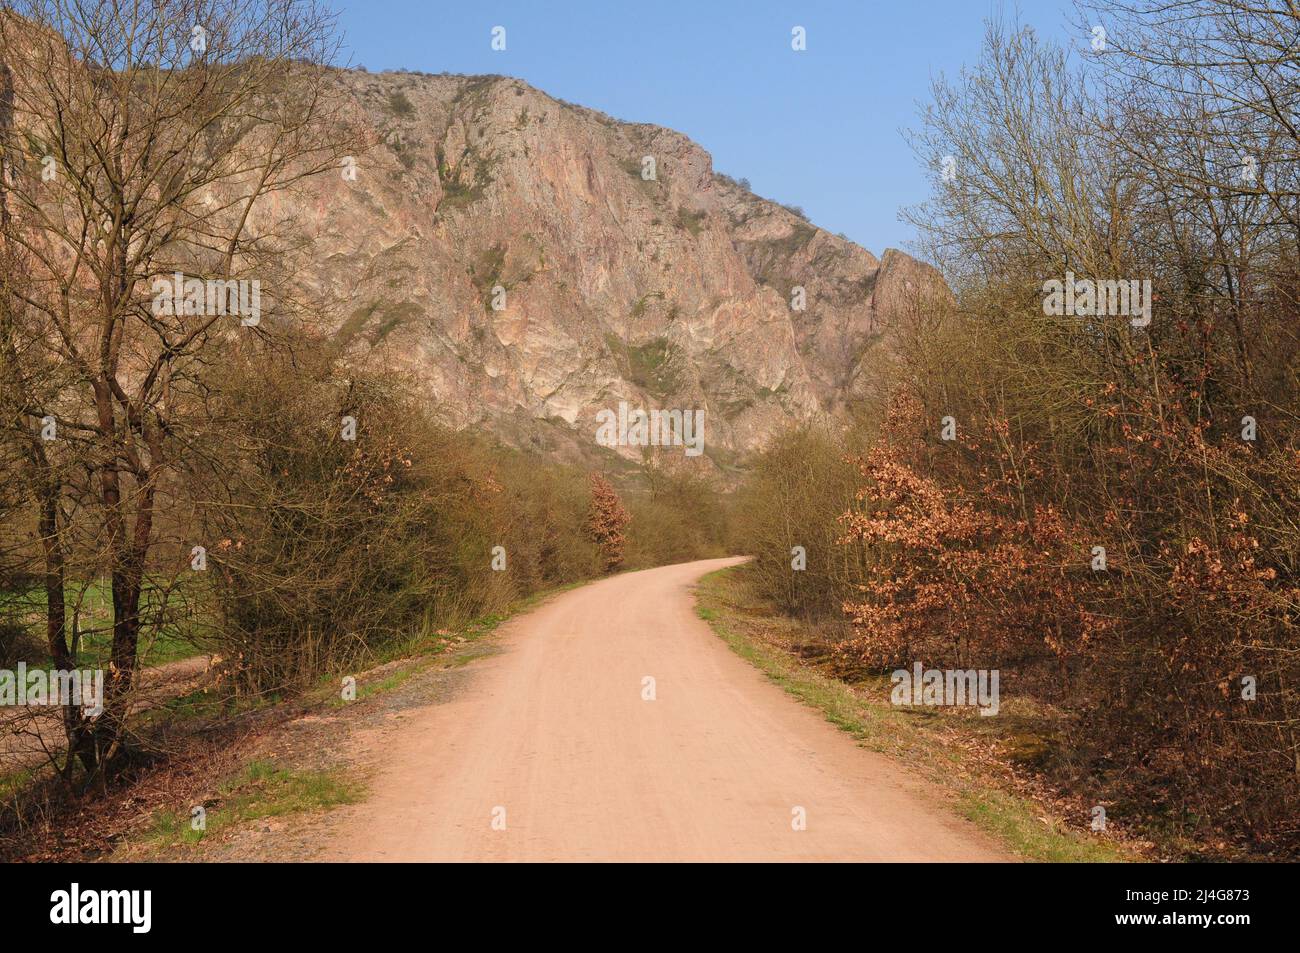 Dirt Road At Natur Reserve Rotenfels Near Bad Kreuznach Rhineland-Palatine Germany On A Beautiful Spring Day Stock Photo